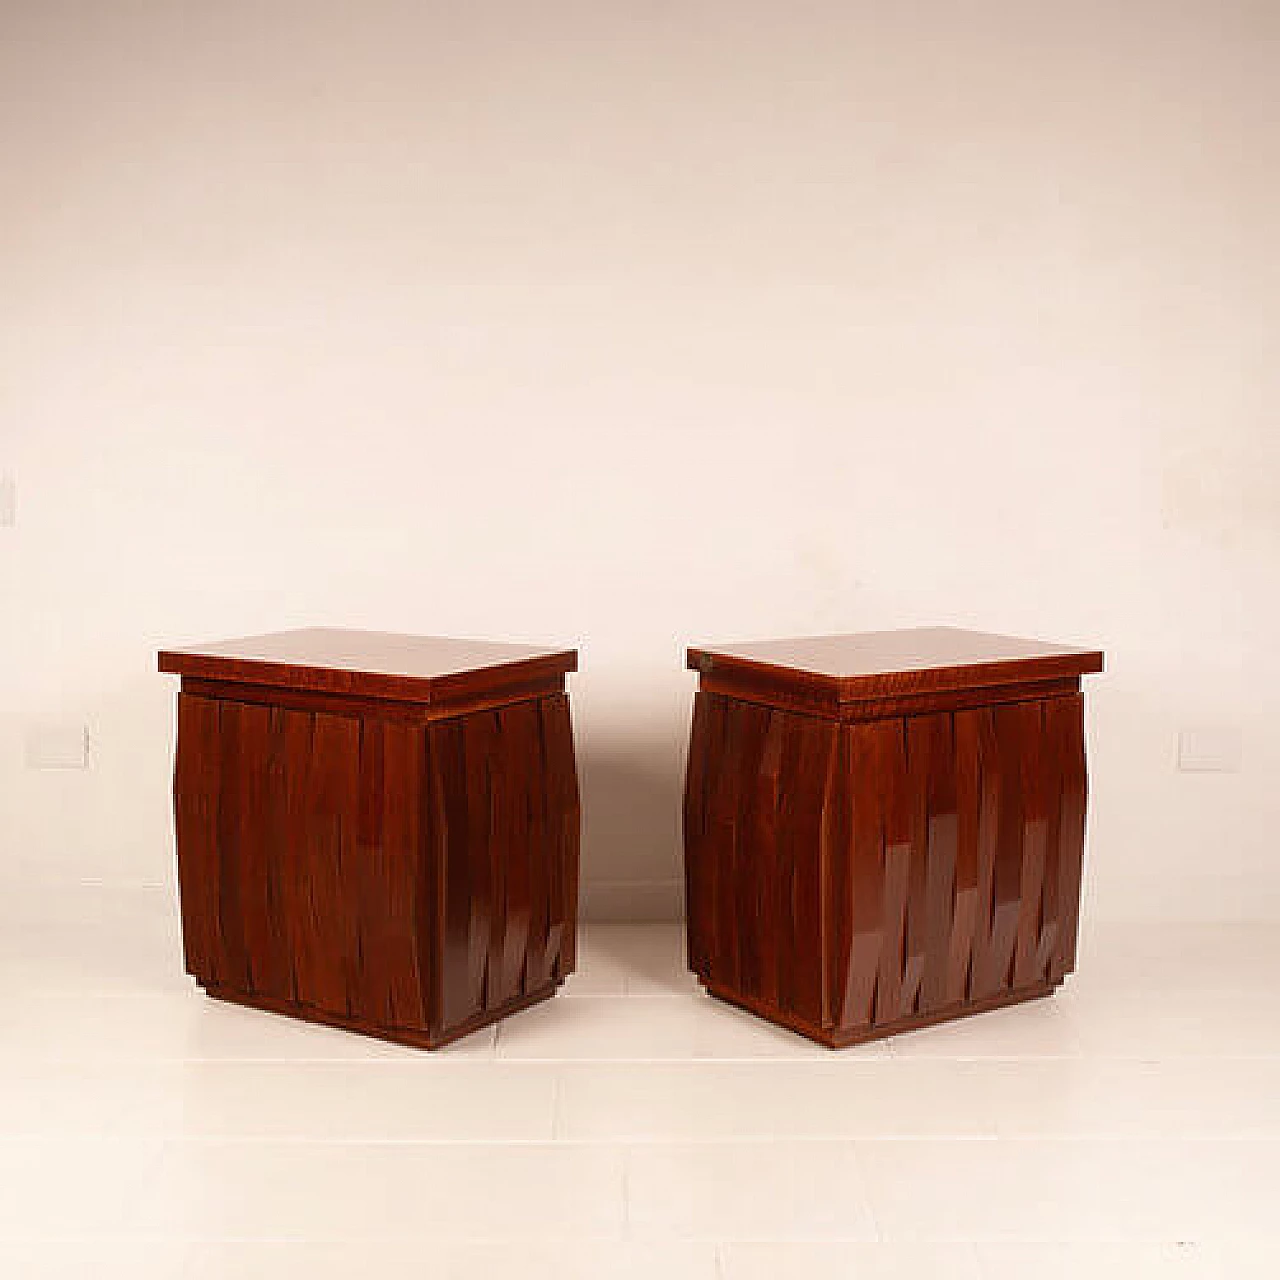 Pair of Barium solid walnut bedside tables by Luciano Frigerio for Frigerio di Desio, 1970s 1